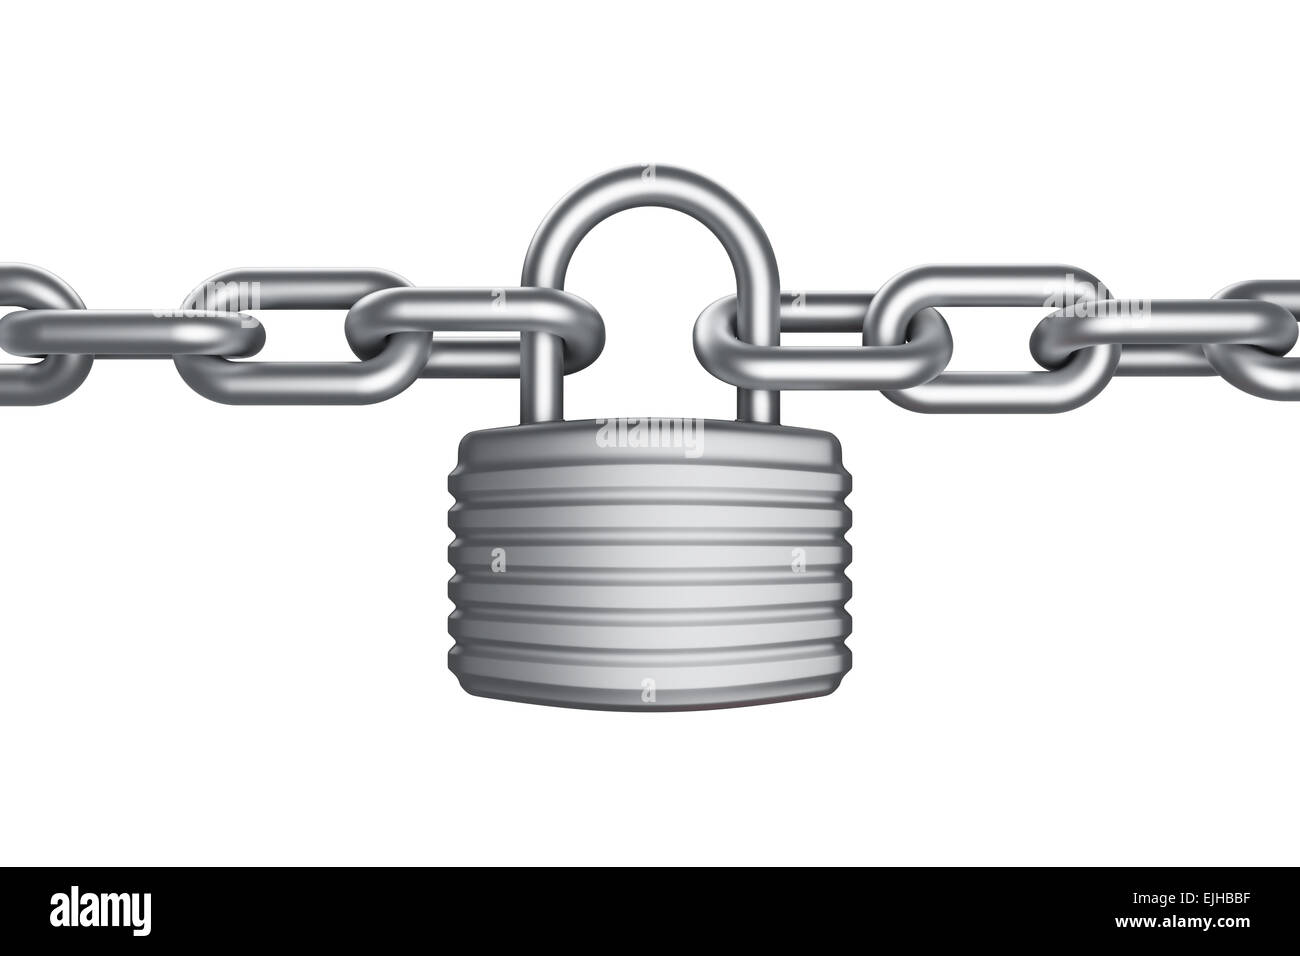 Secure lock and chain Stock Photo